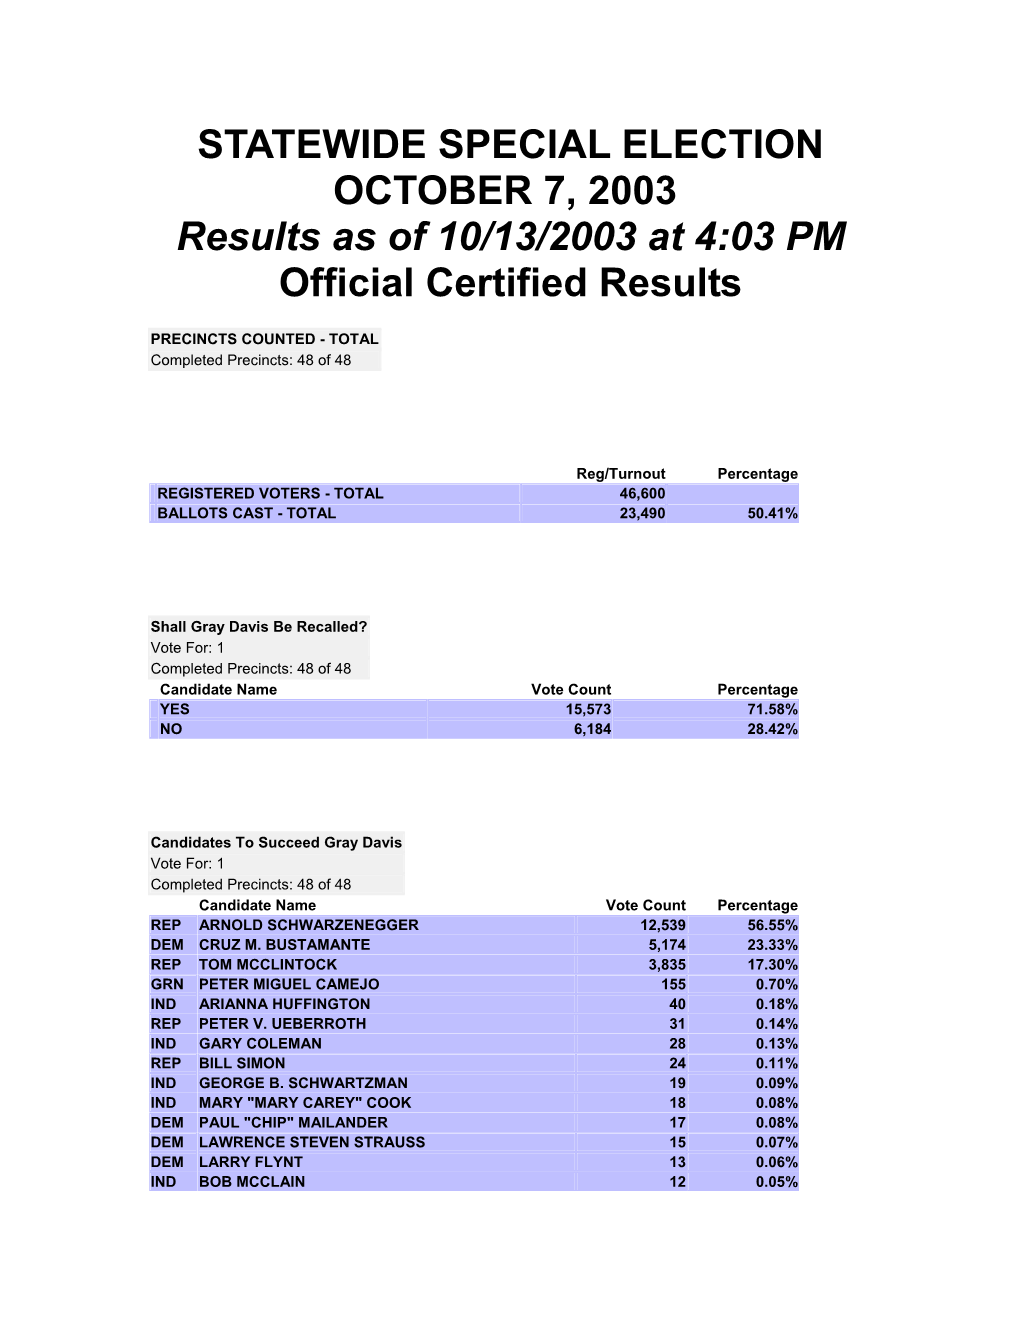 STATEWIDE SPECIAL ELECTION OCTOBER 7, 2003 Results As of 10/13/2003 at 4:03 PM Official Certified Results